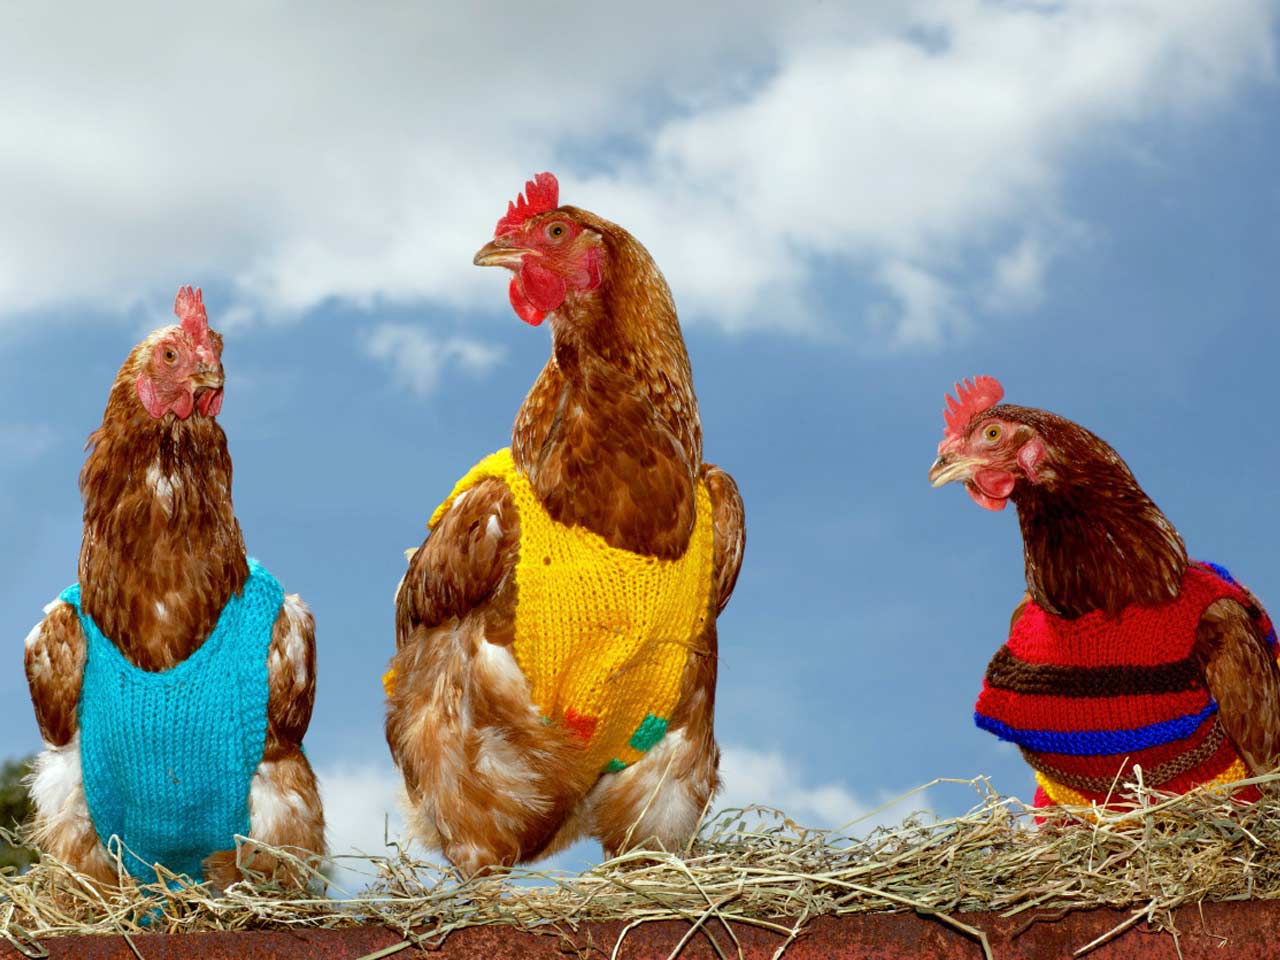 Chickens in vests